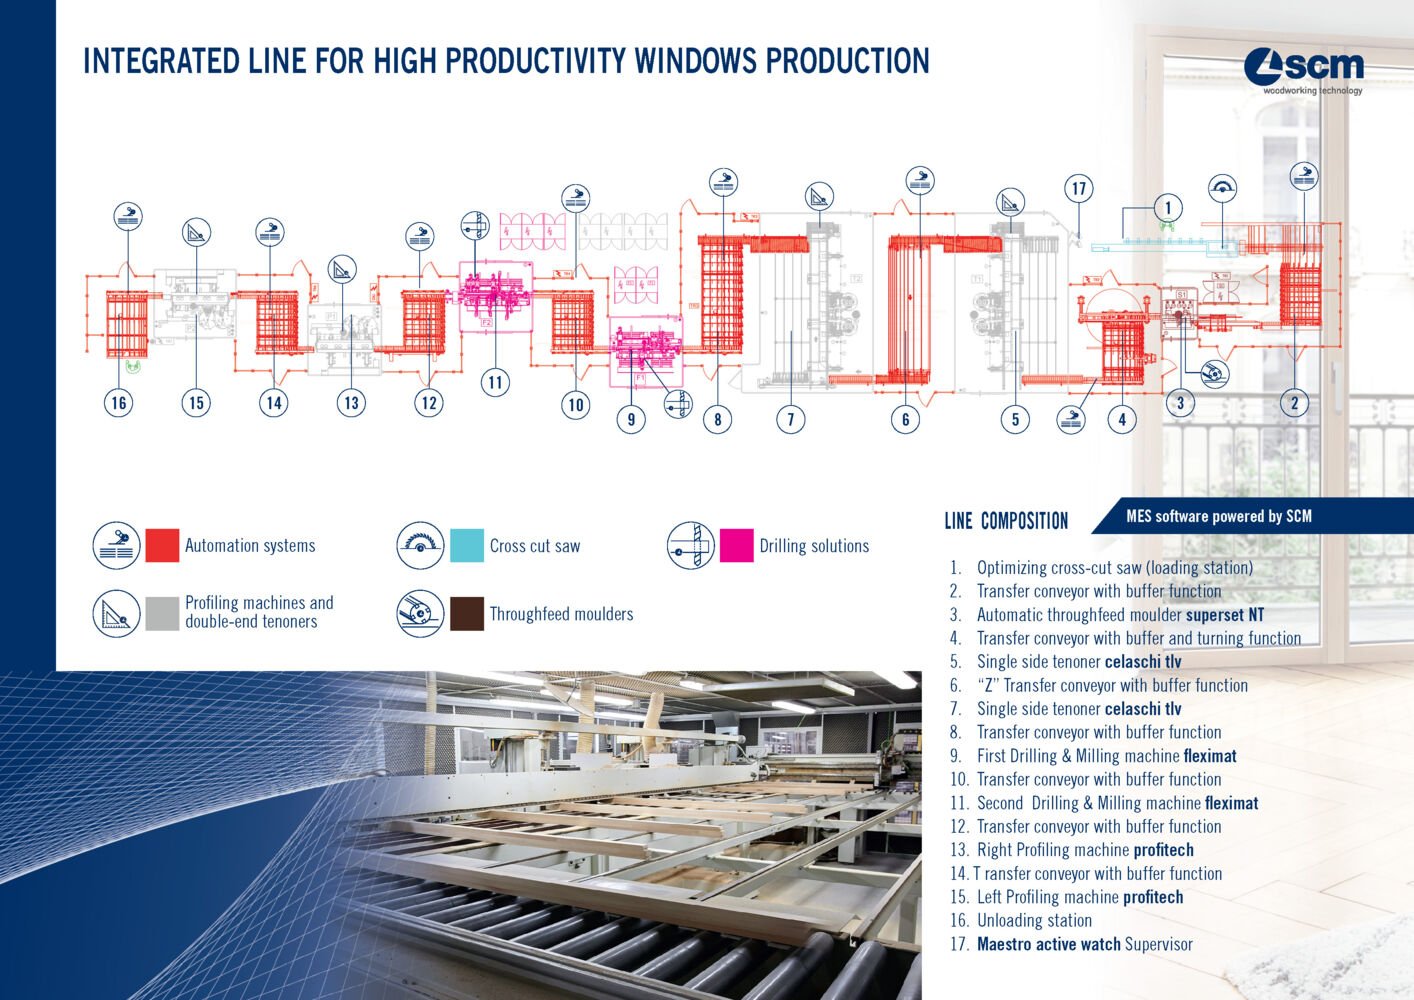 High-productivity integrated line for machining windows